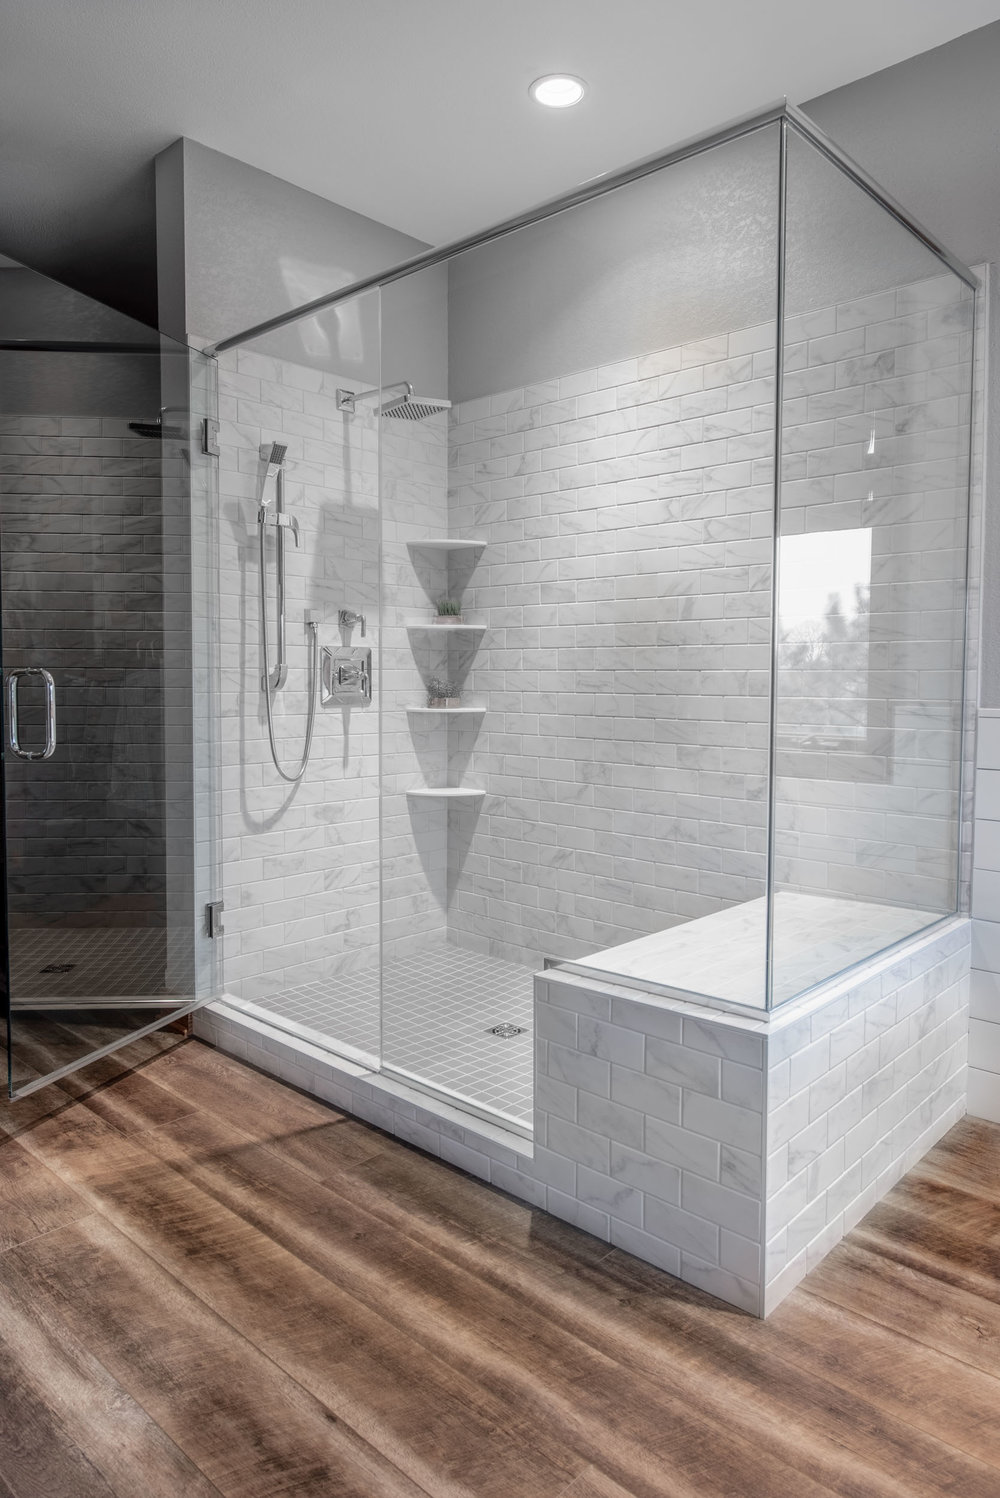 How To Choose Shower Tile When Remodeling A Bathroom — Degnan ...